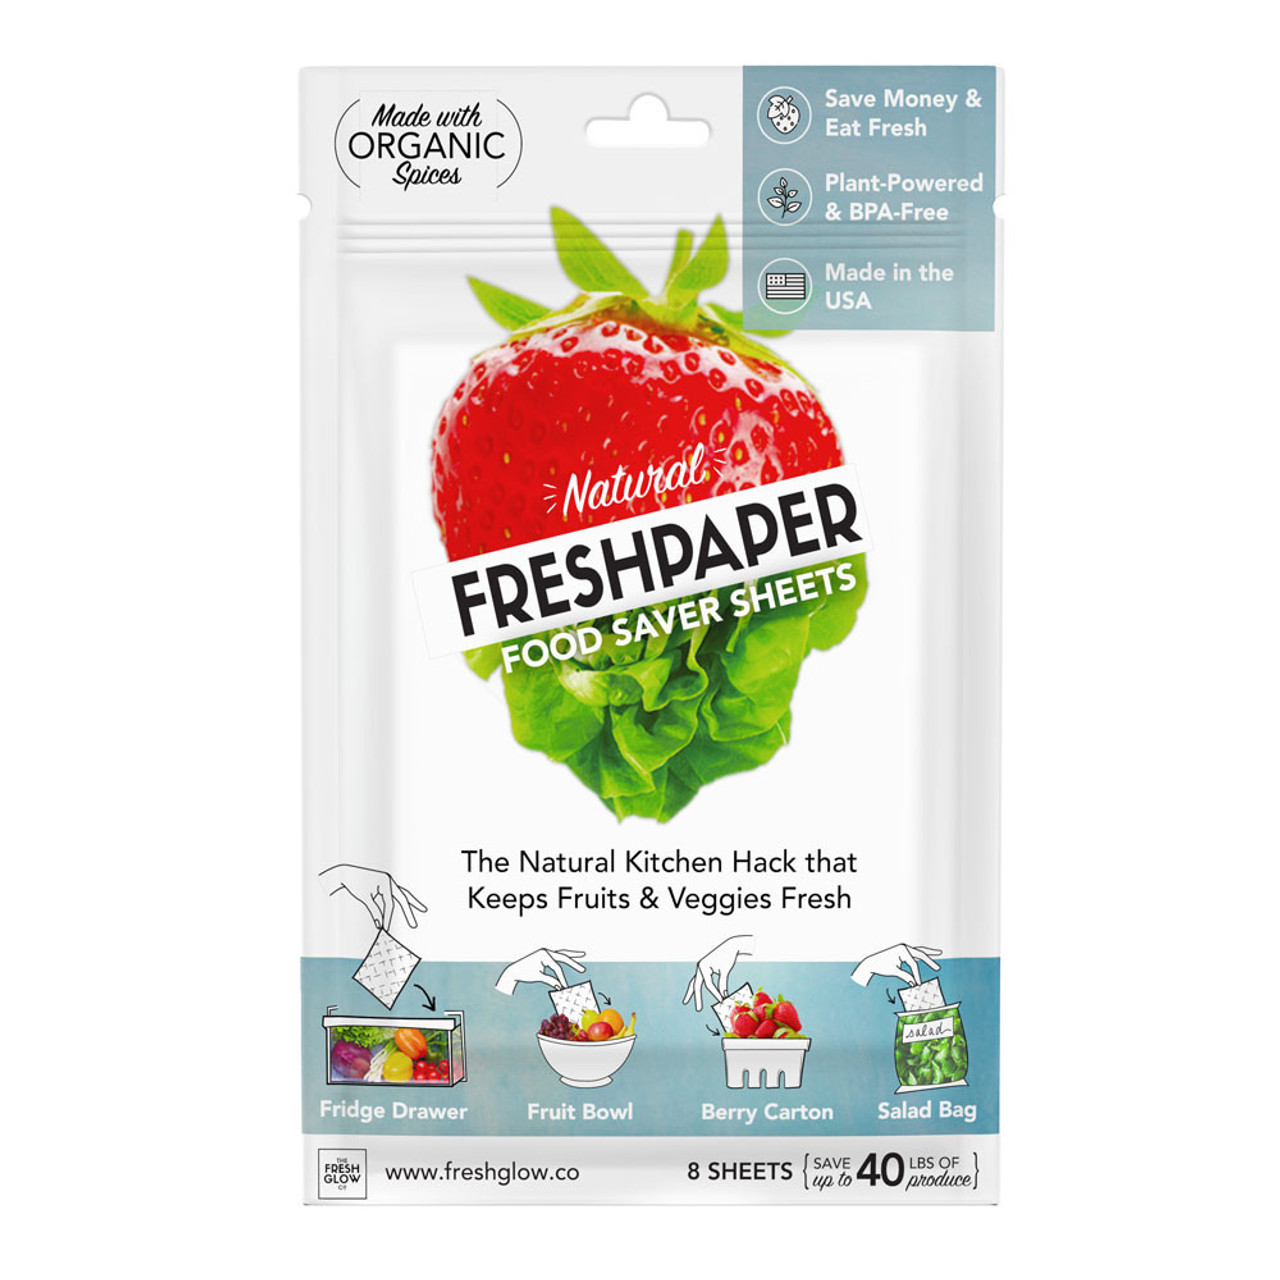 THE FRESHGLOW Co FRESHPAPER Food Saver Sheets for Cheese, 8 Reusable Sheets  (1 Pack), Keeps Cheese Fresh for 2-4x Longer- Made in the USA